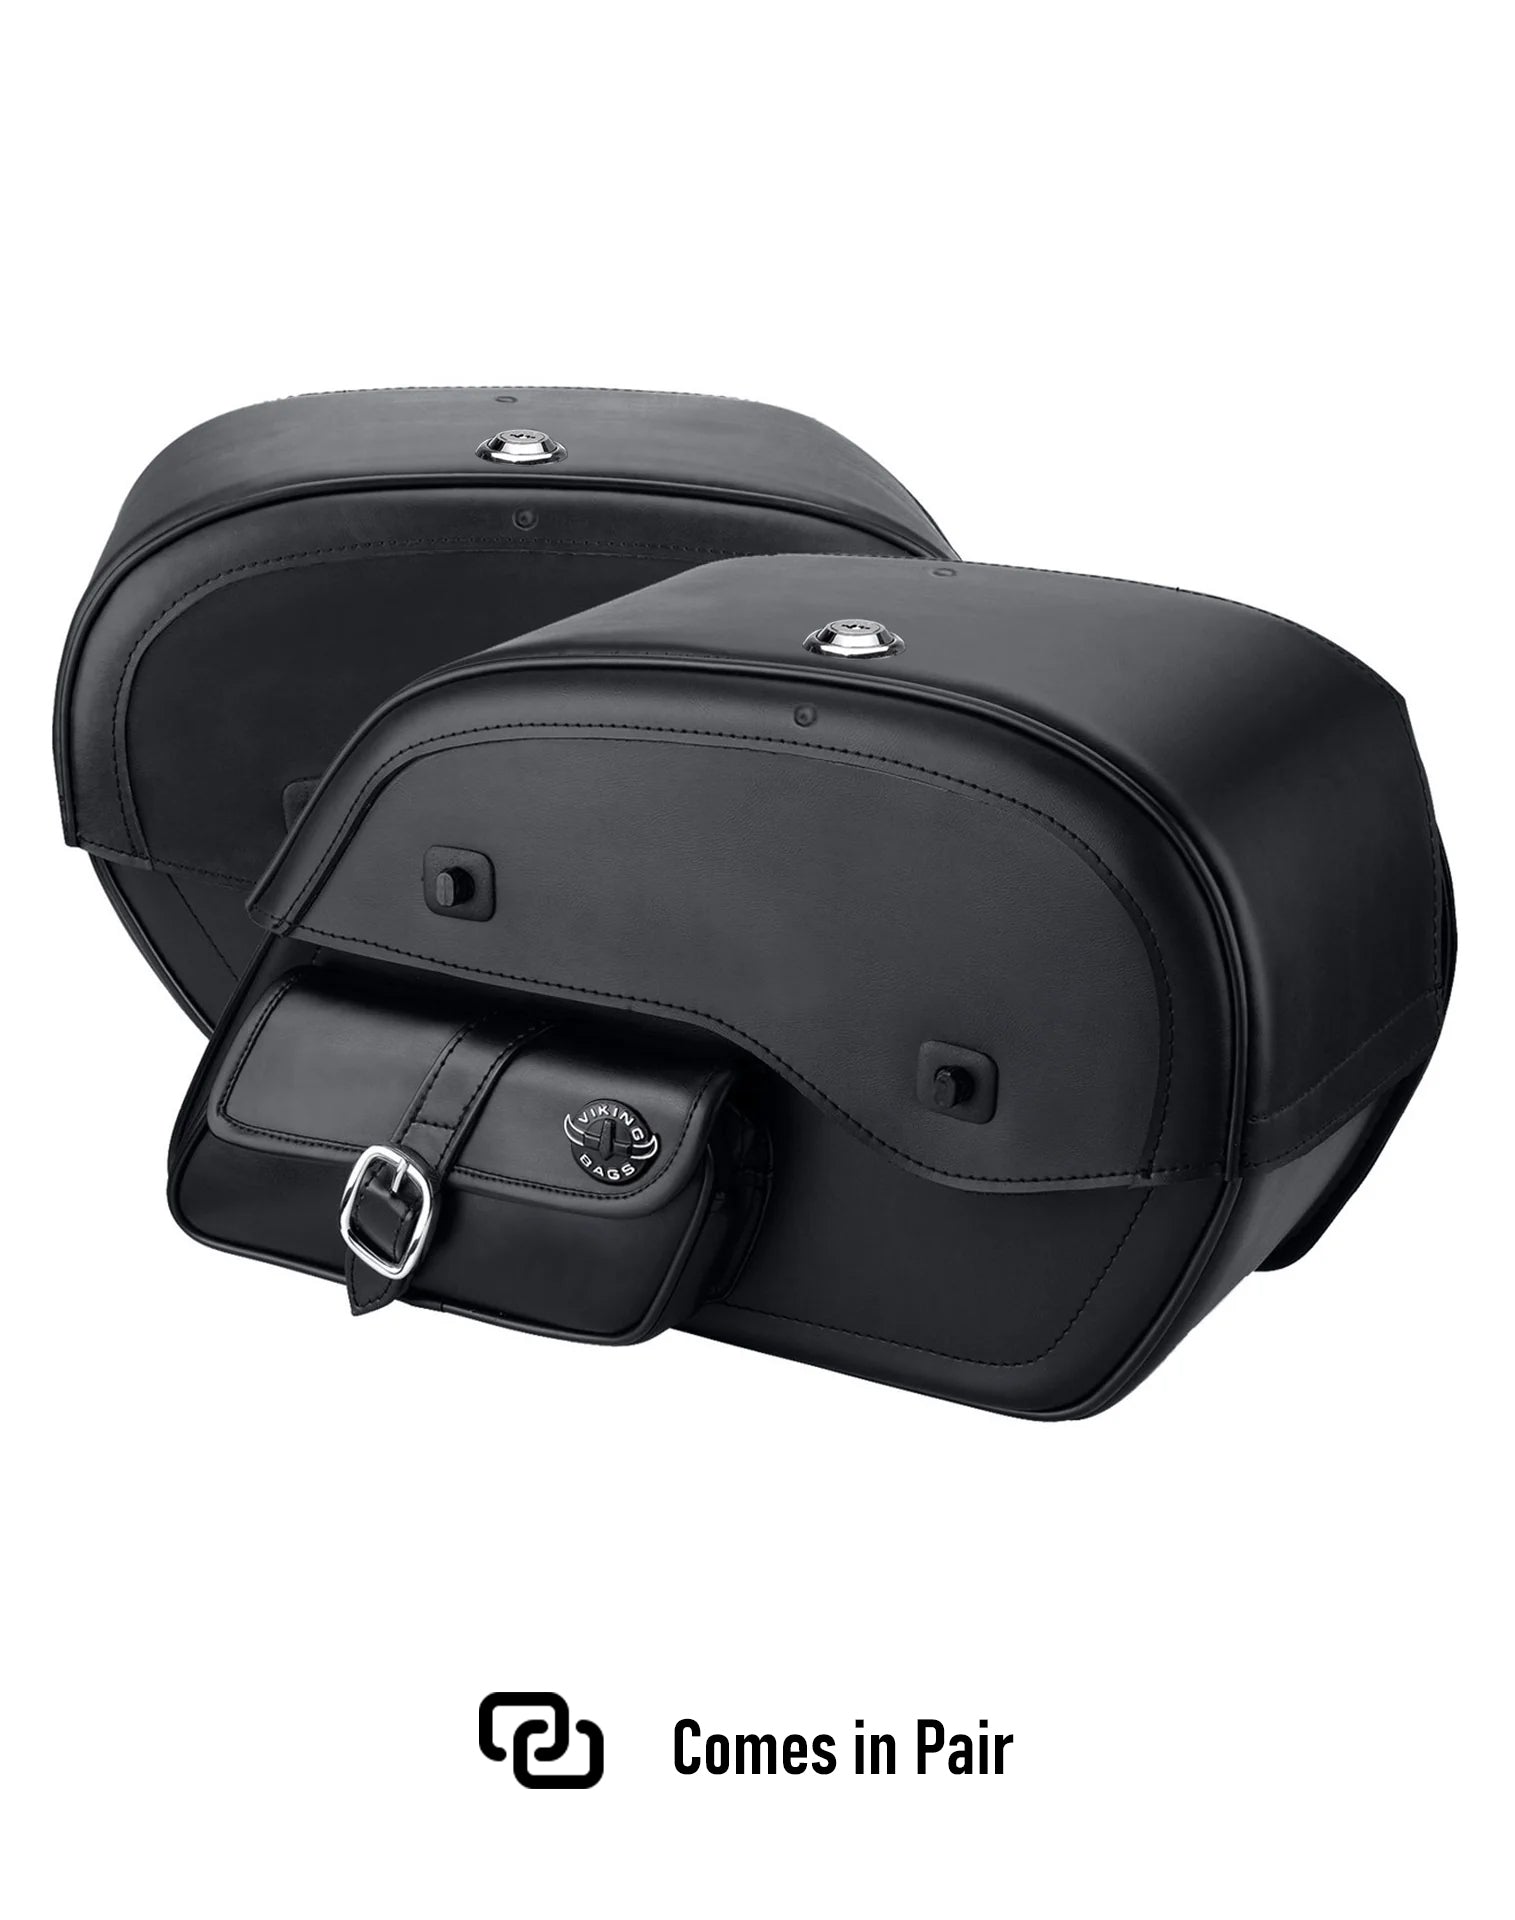 Viking Essential Side Pocket Large Suzuki Boulevard M50 Vz800 Leather Motorcycle Saddlebags Weather Resistant Bags Comes in Pair